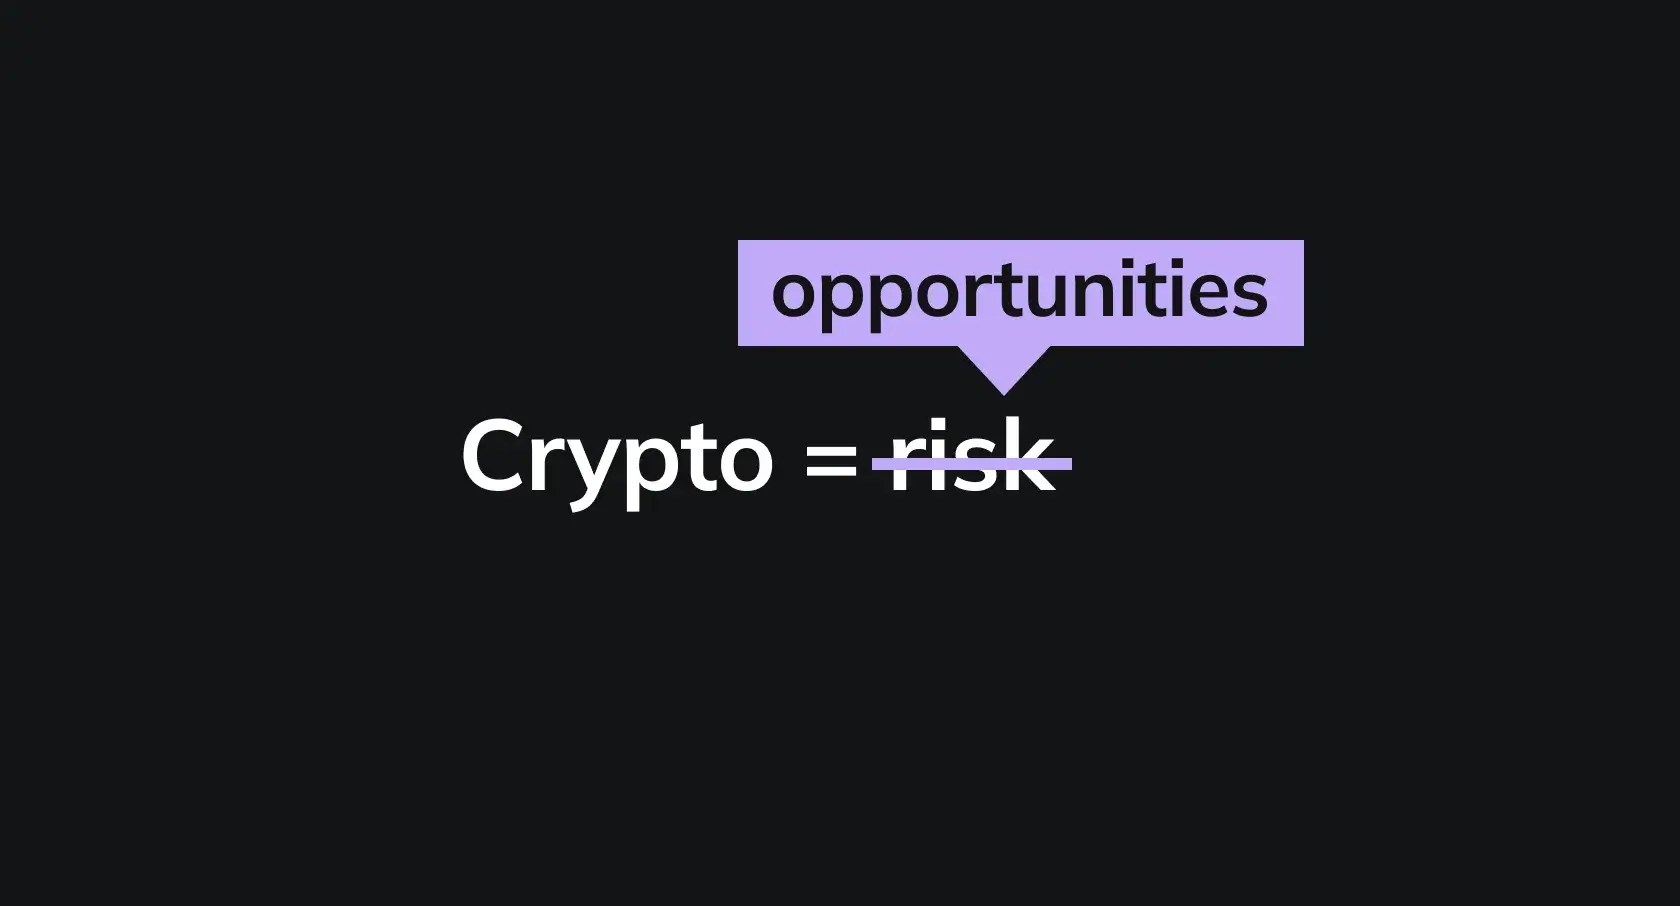 Crypto ≠ risk. Crypto = opportunities